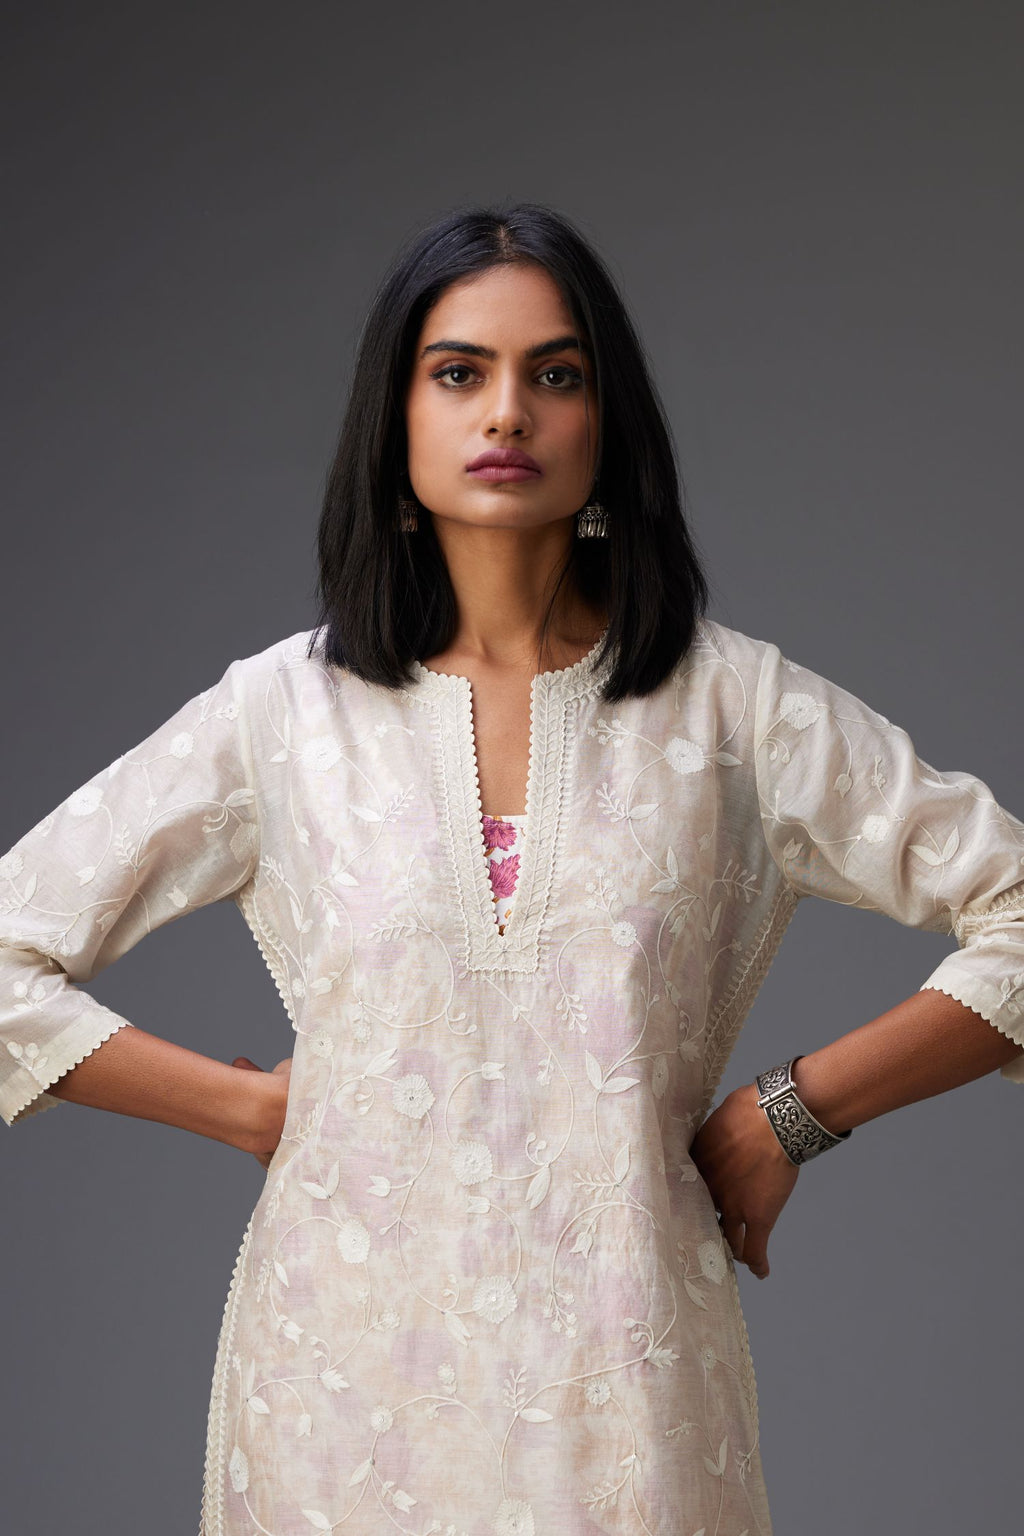 Off white silk chanderi straight kurta set with all-over tonal thread jaal embroidery and bead work at edges